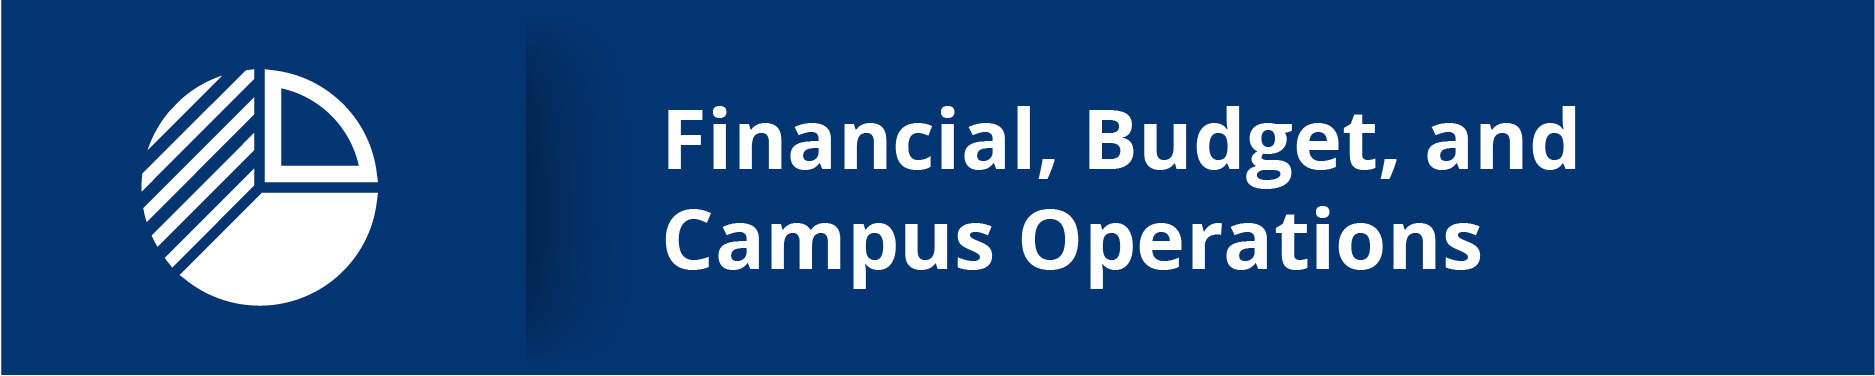 Financial, Budget and Campus Operations